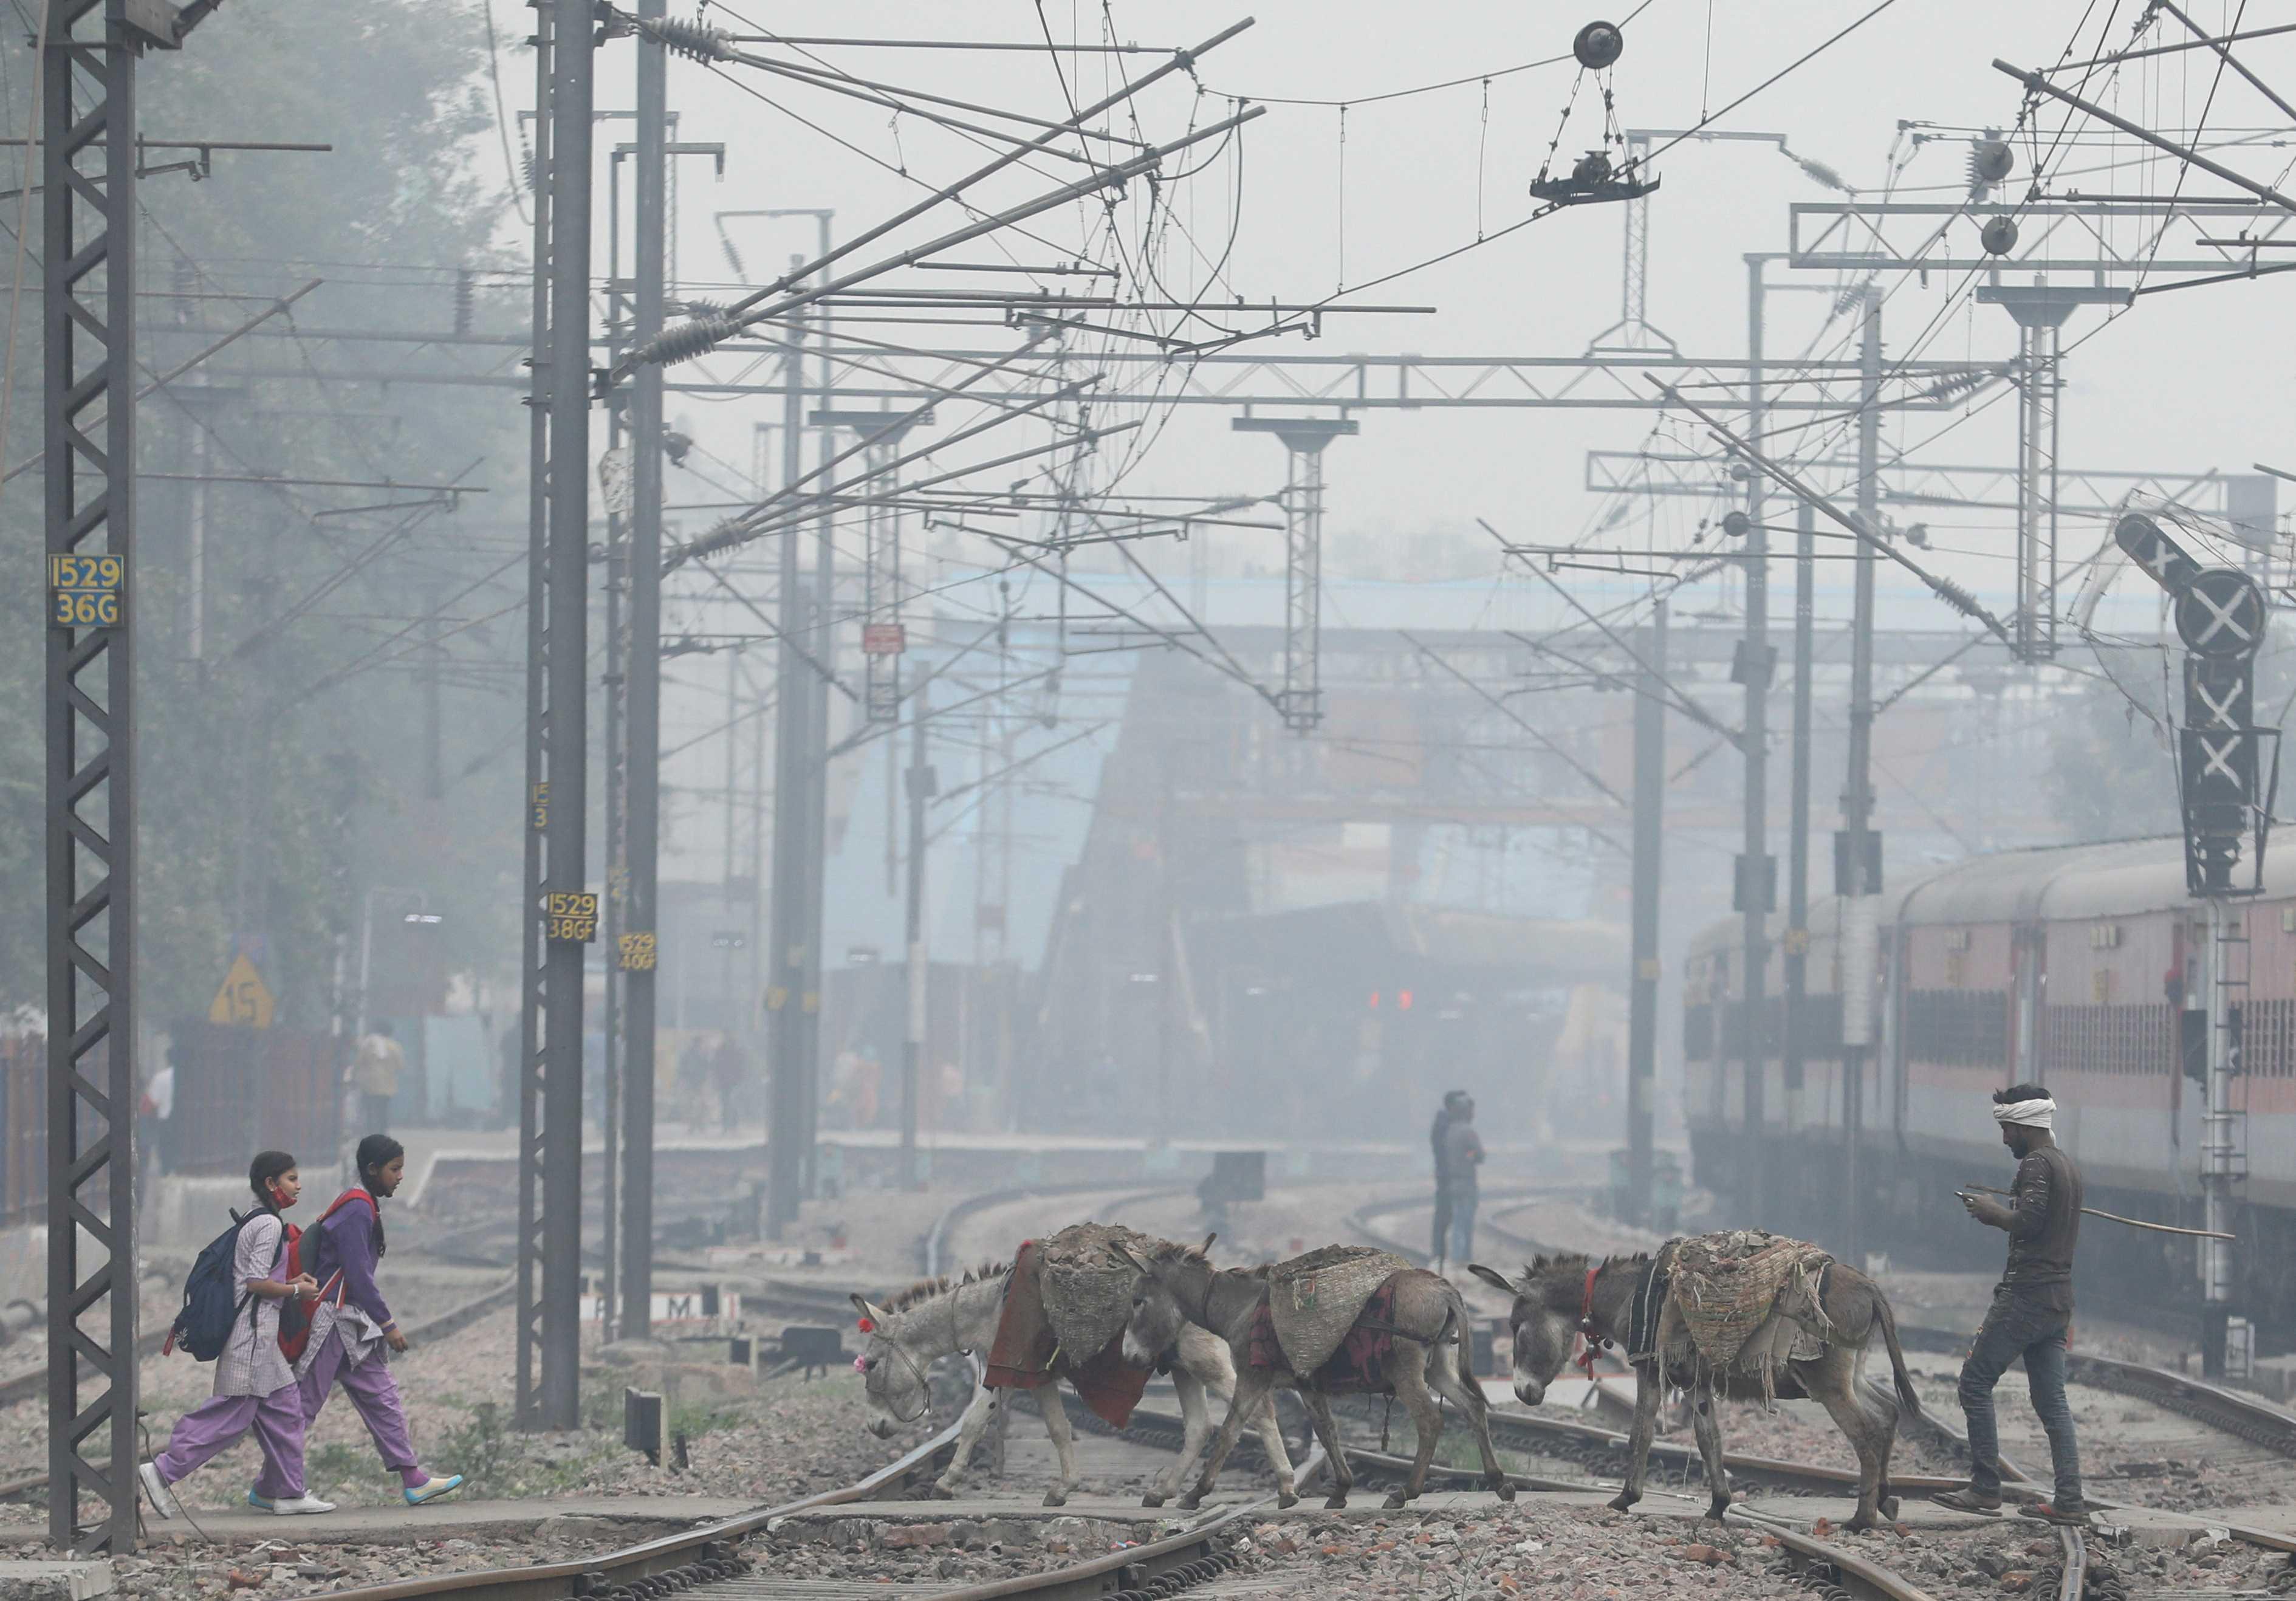 School girls and mules are seen crossing railway tracks on a smoggy morning in New Delhi, India, Dec 2, 2021. Photo: Reuters